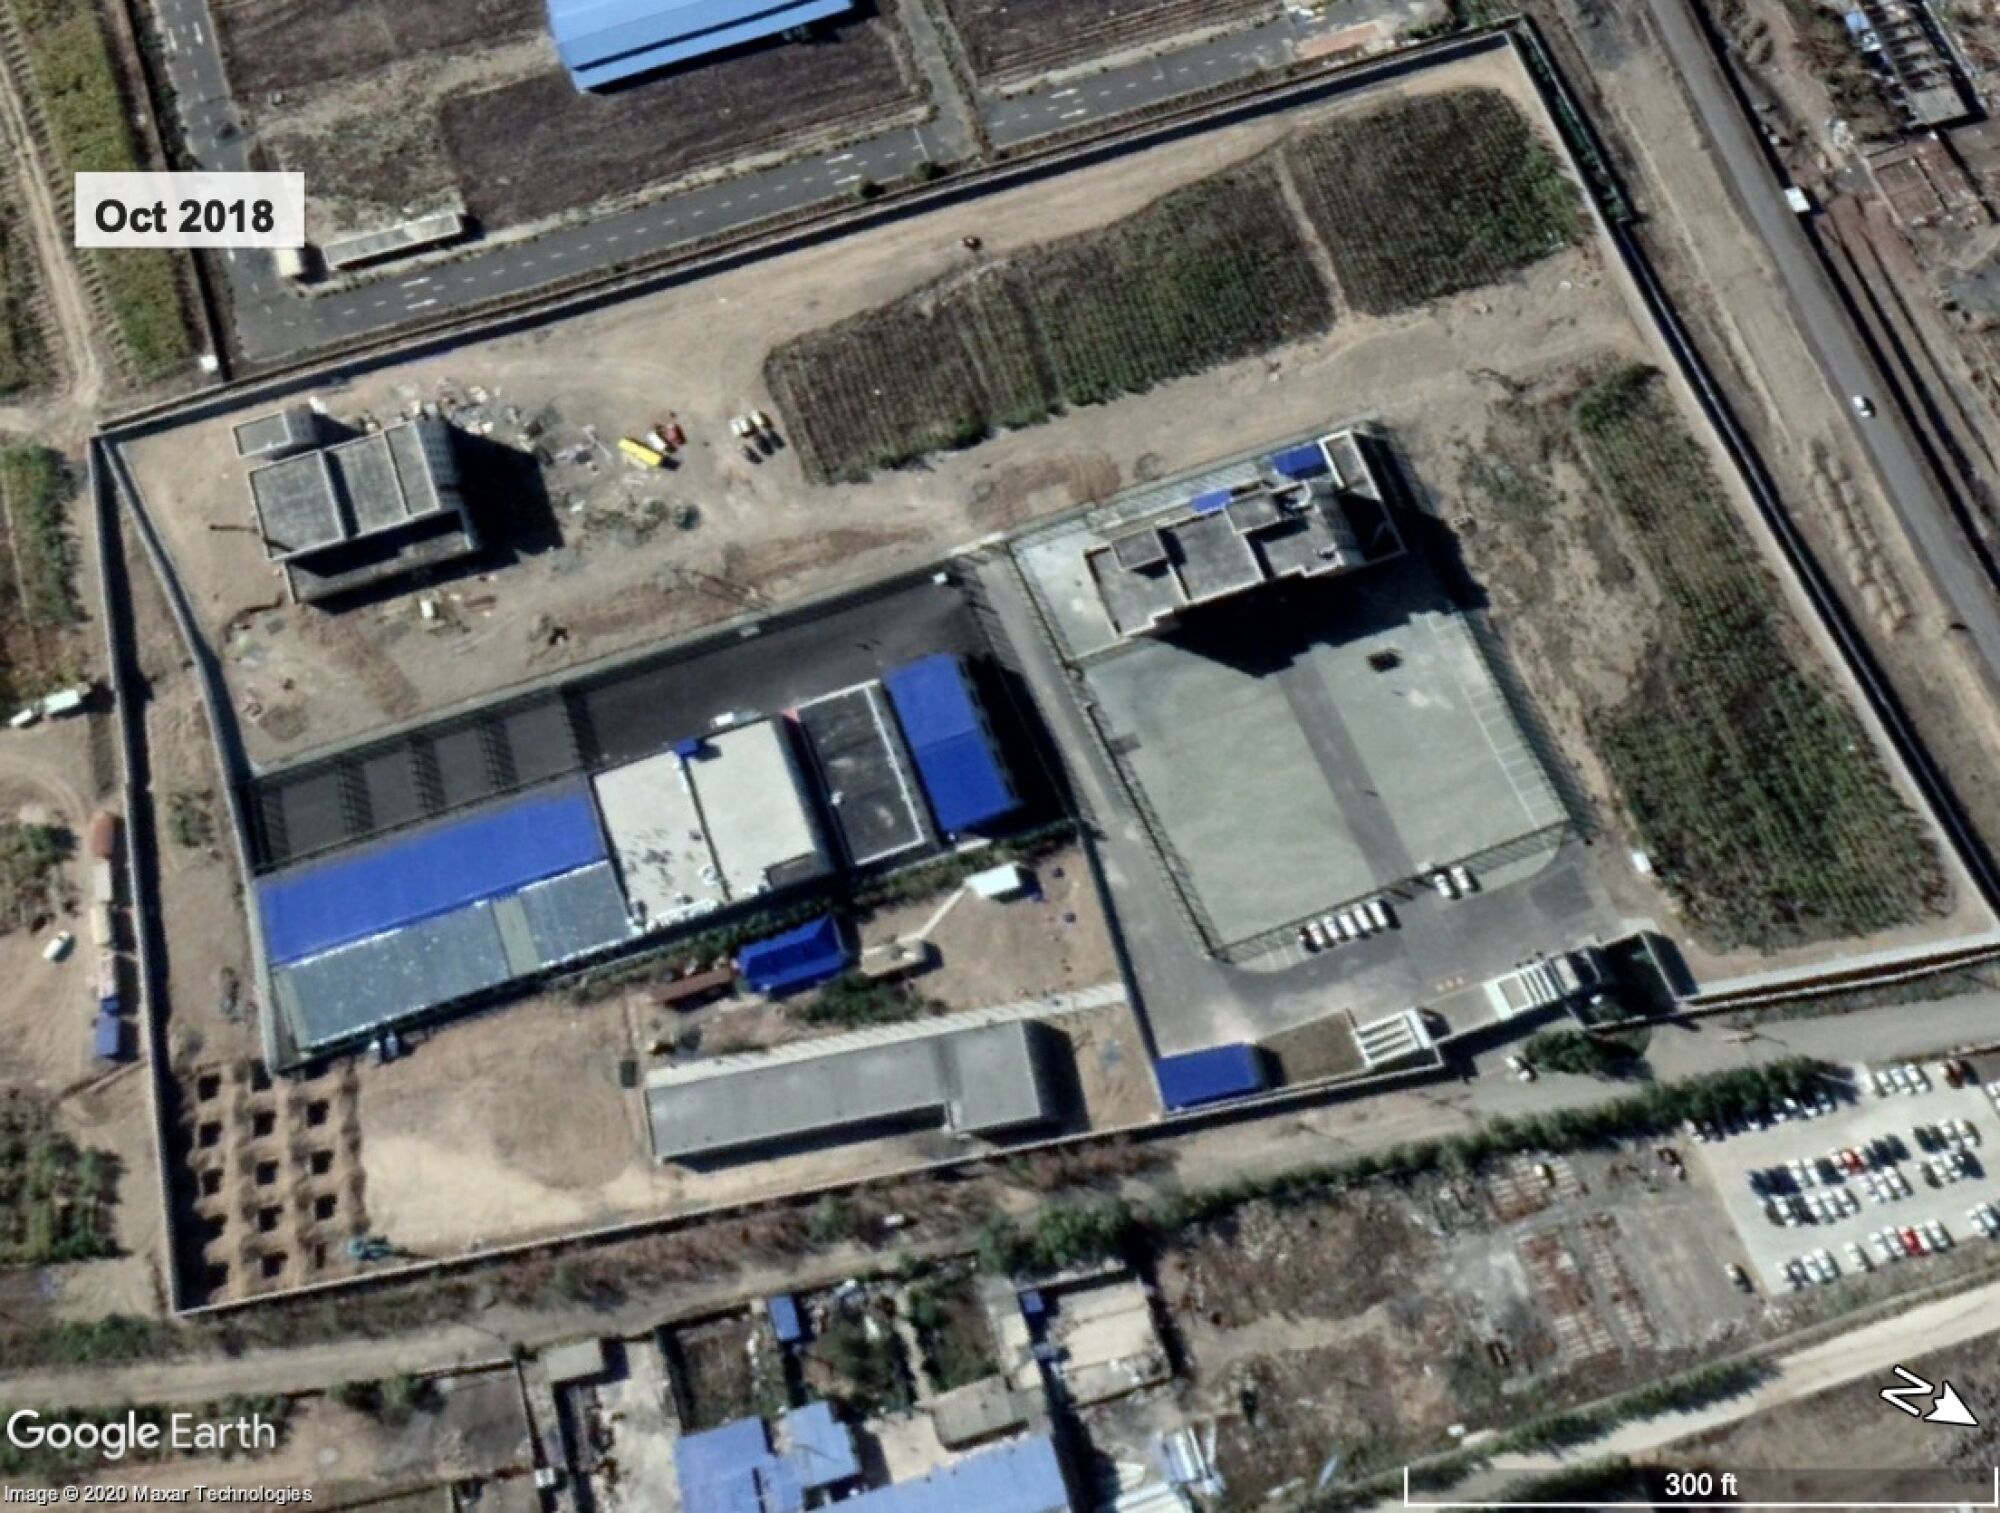 Satellite imagery of a suspected detention site in October 2018 shows internal walls and extensive wire fencing.